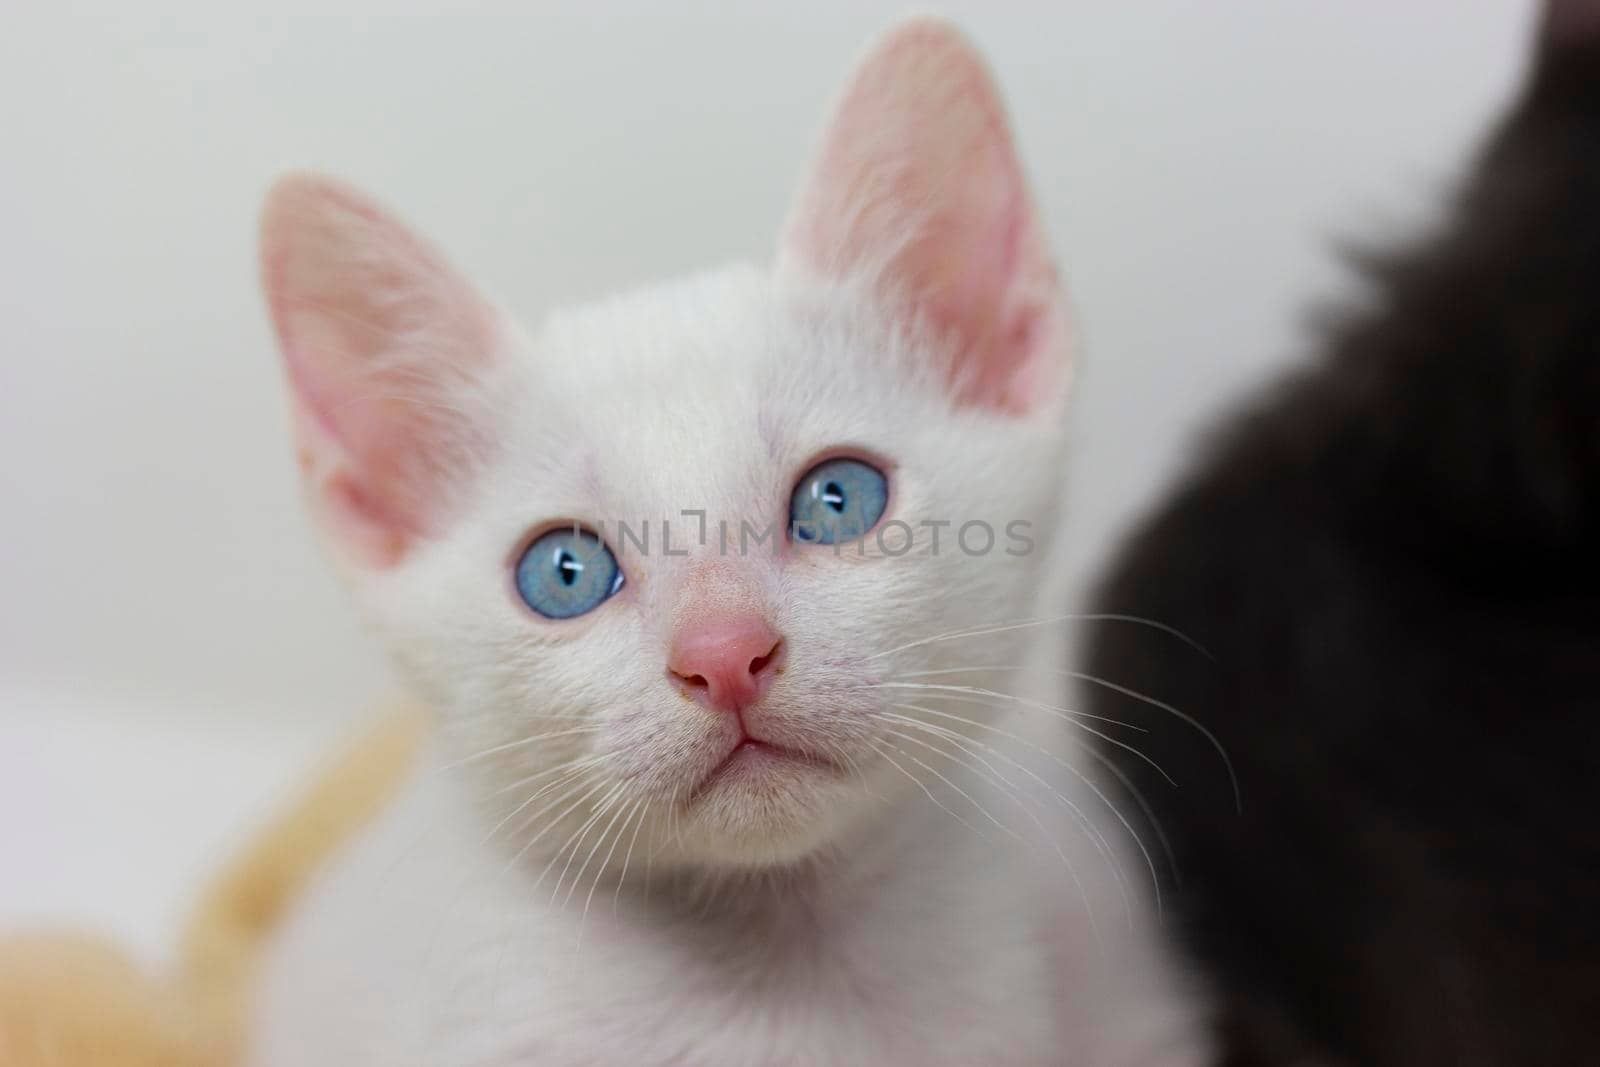 White kittens with blue eyes and black kittens khao manee playing with their siblings